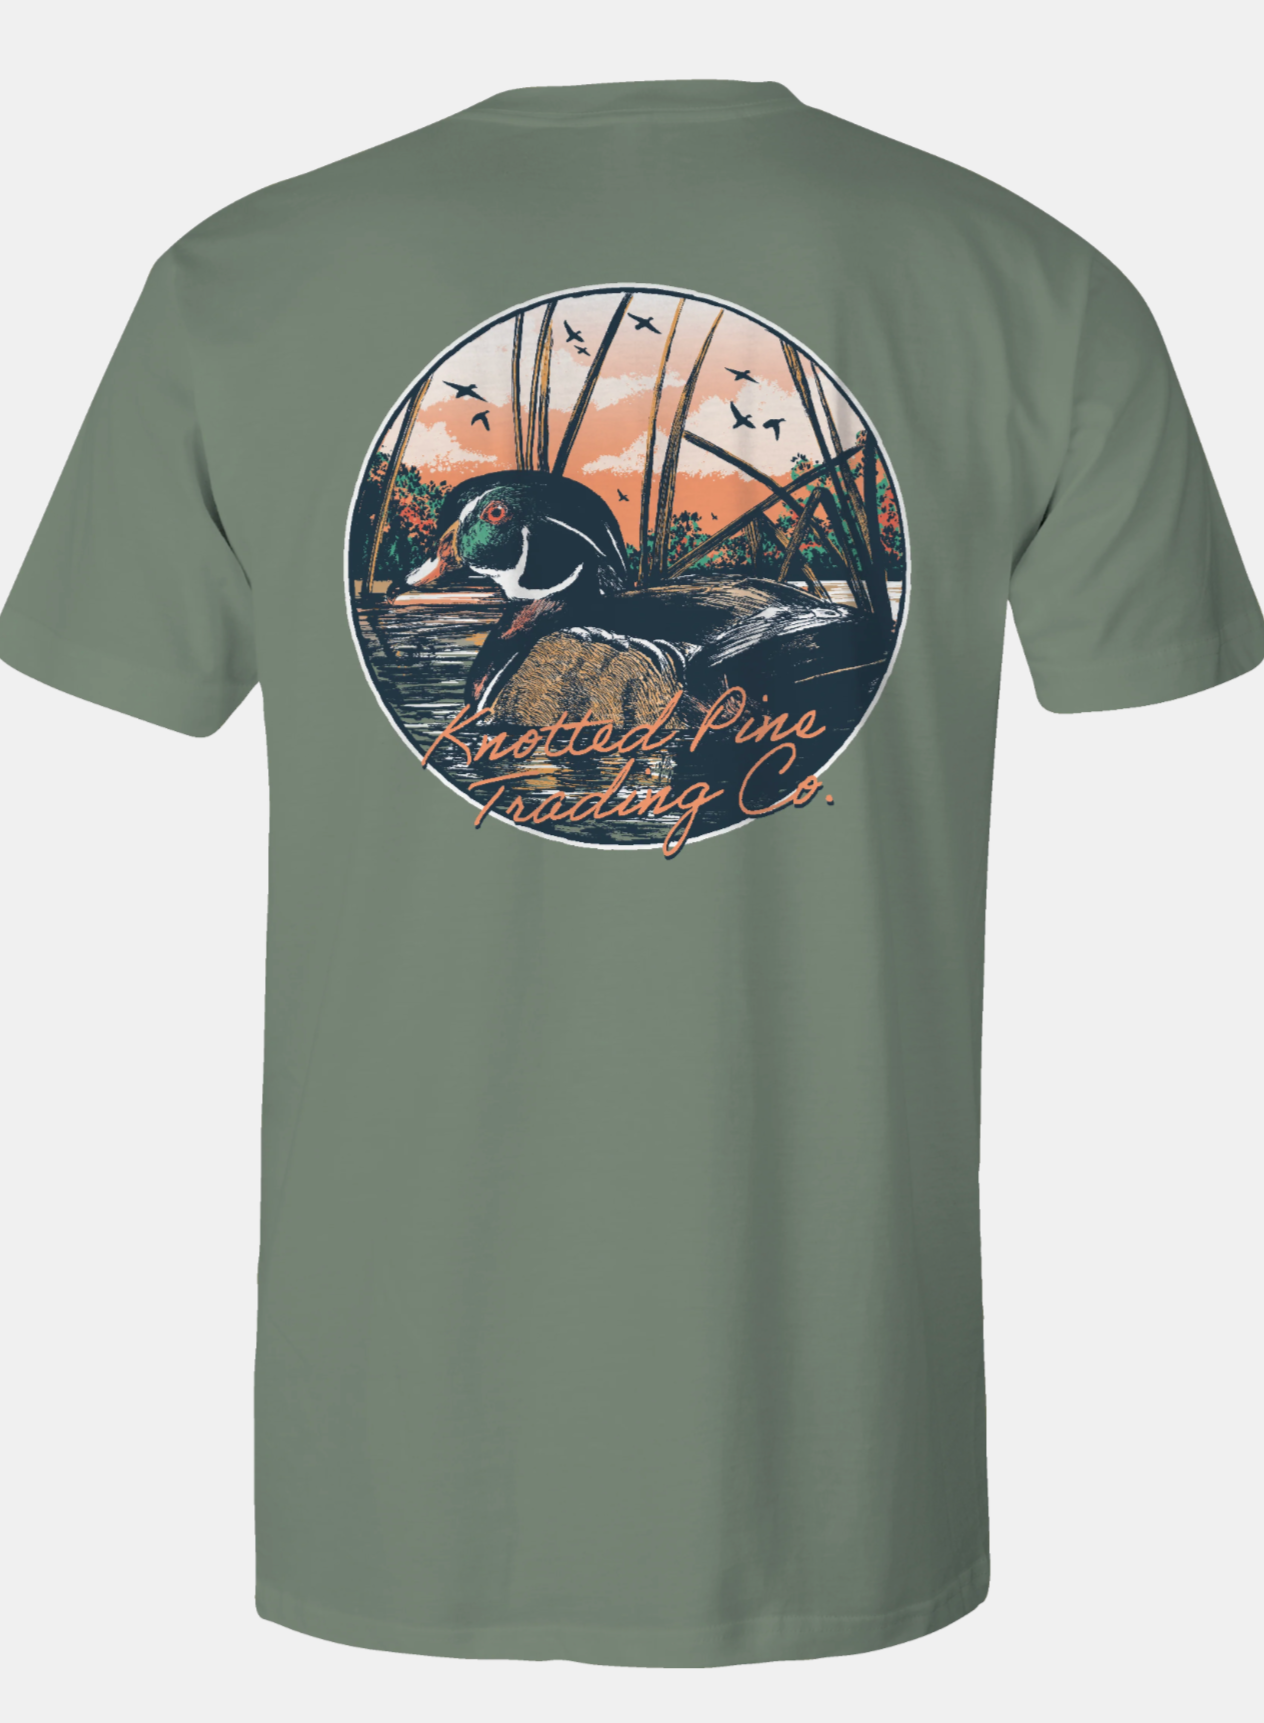 Sunset Mallard Duck Tee by Knotted Pine Trading Co.